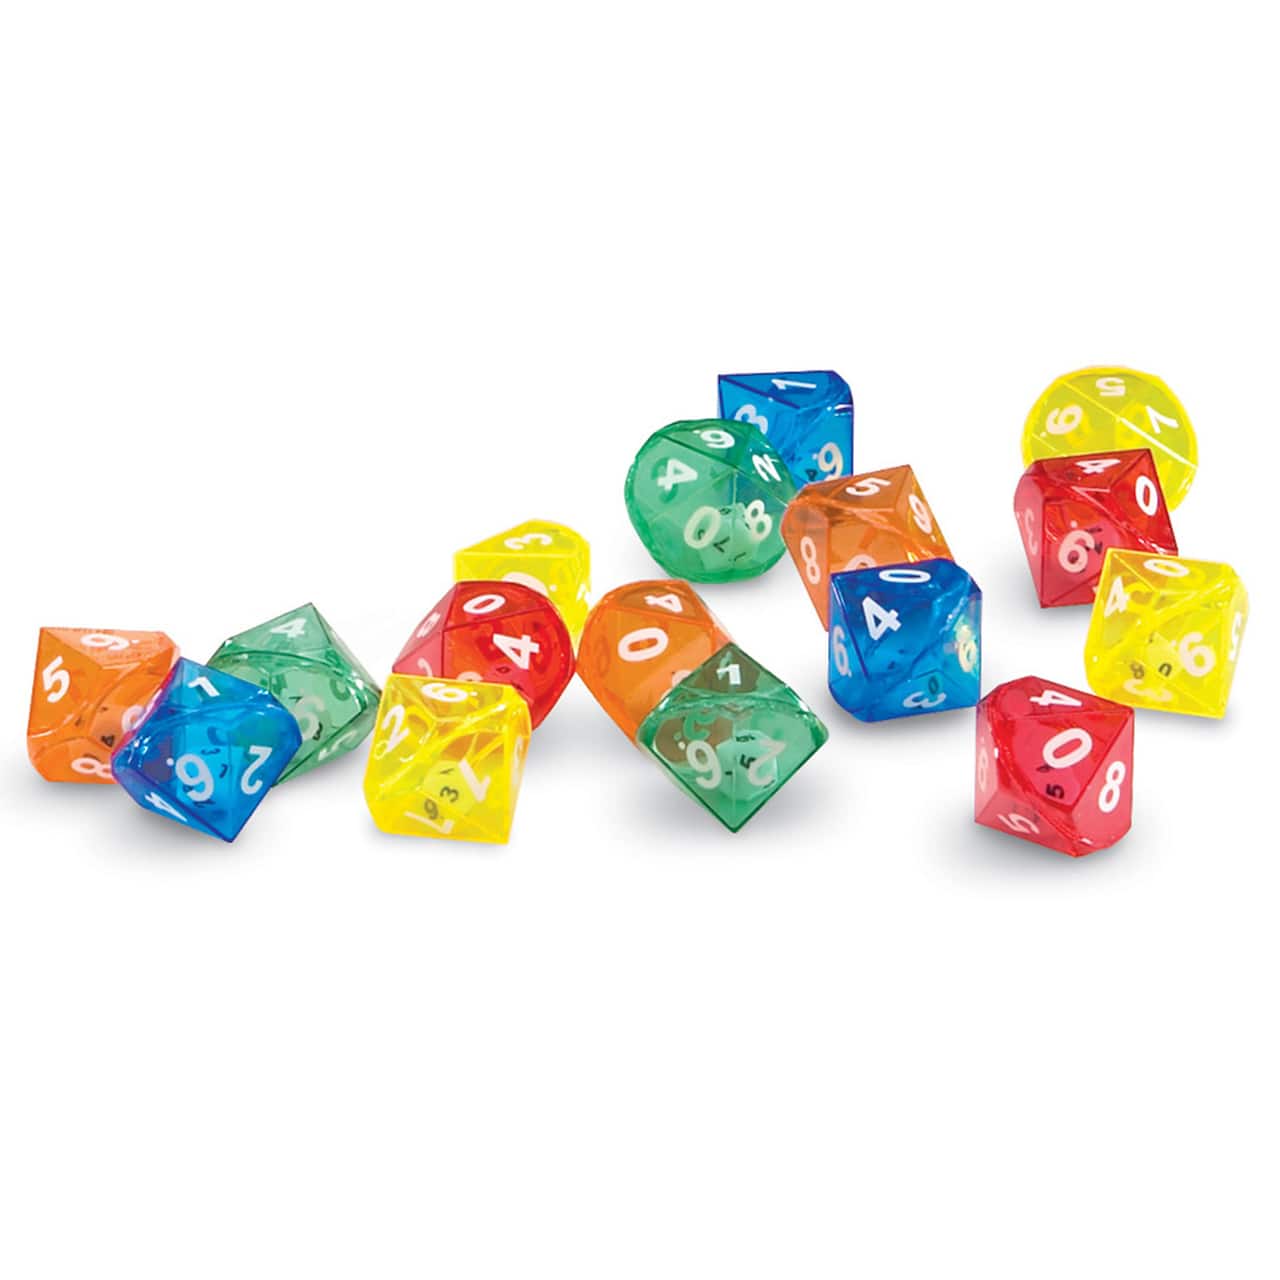 10-Sided Dice in Dice, Set of 72